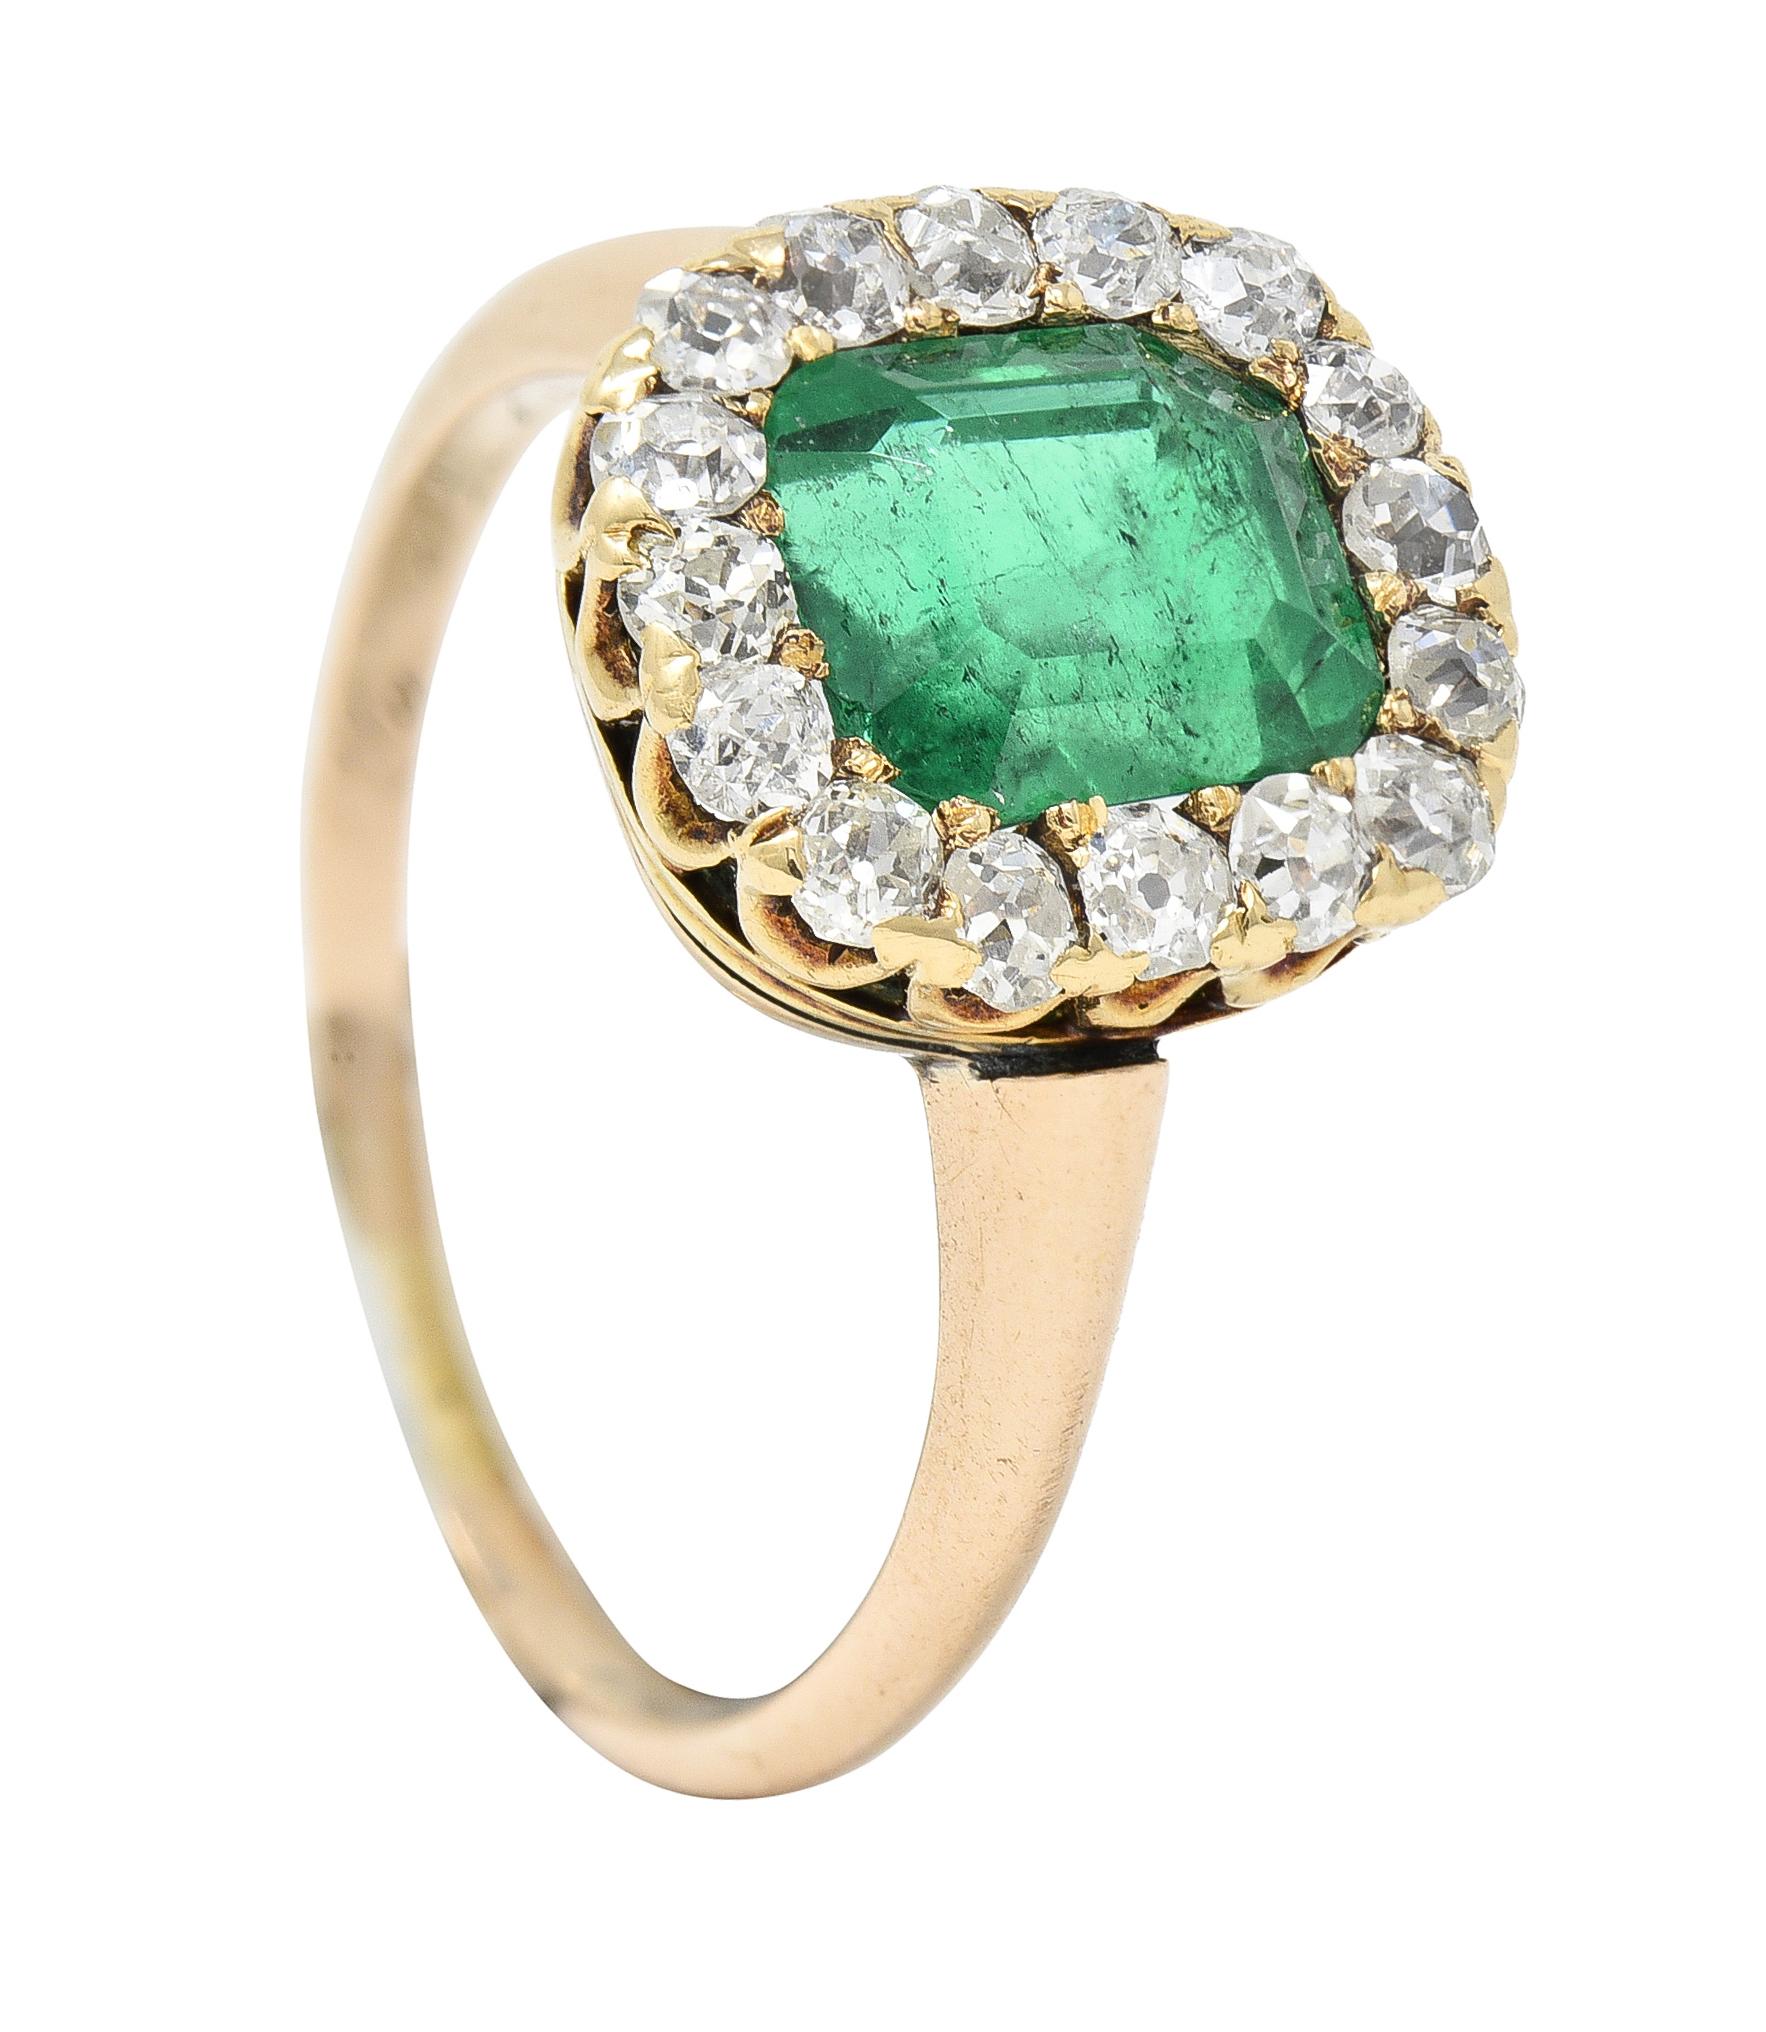 Victorian 2.51 CTW Colombian Emerald Diamond 14 Karat Yellow Gold Halo Ring GIA For Sale 5